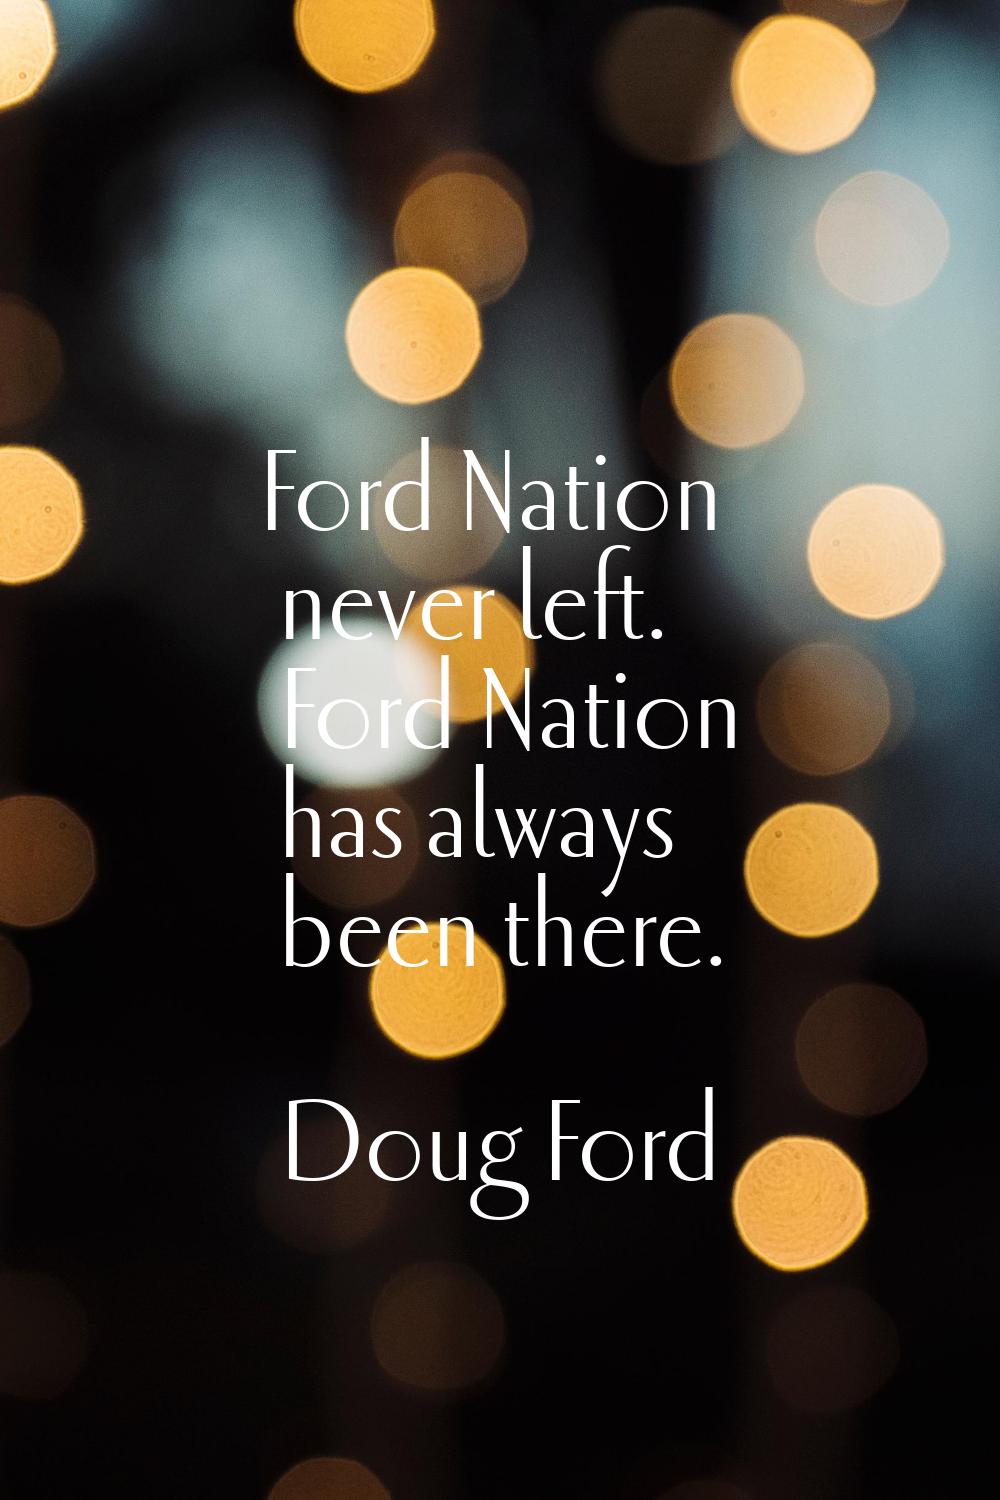 Ford Nation never left. Ford Nation has always been there.